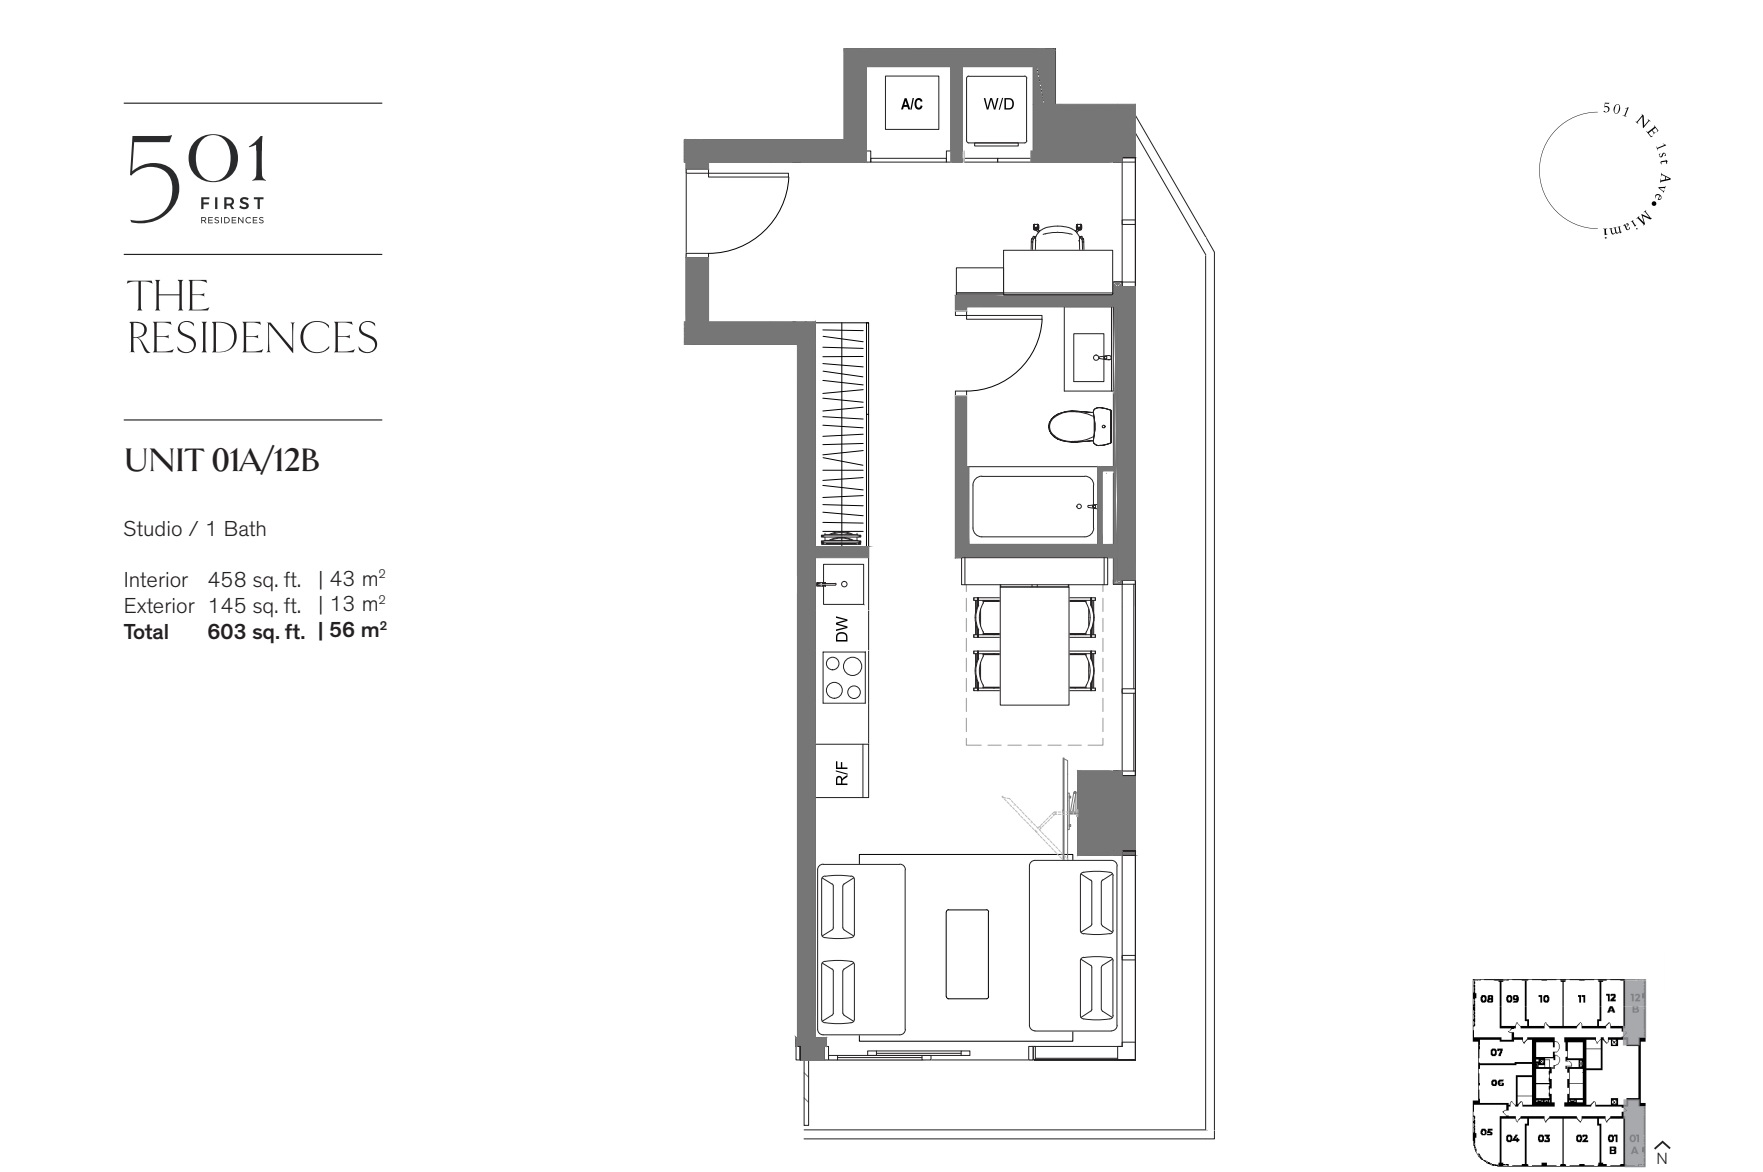 501 FIRST Residences Unit 01A 12B